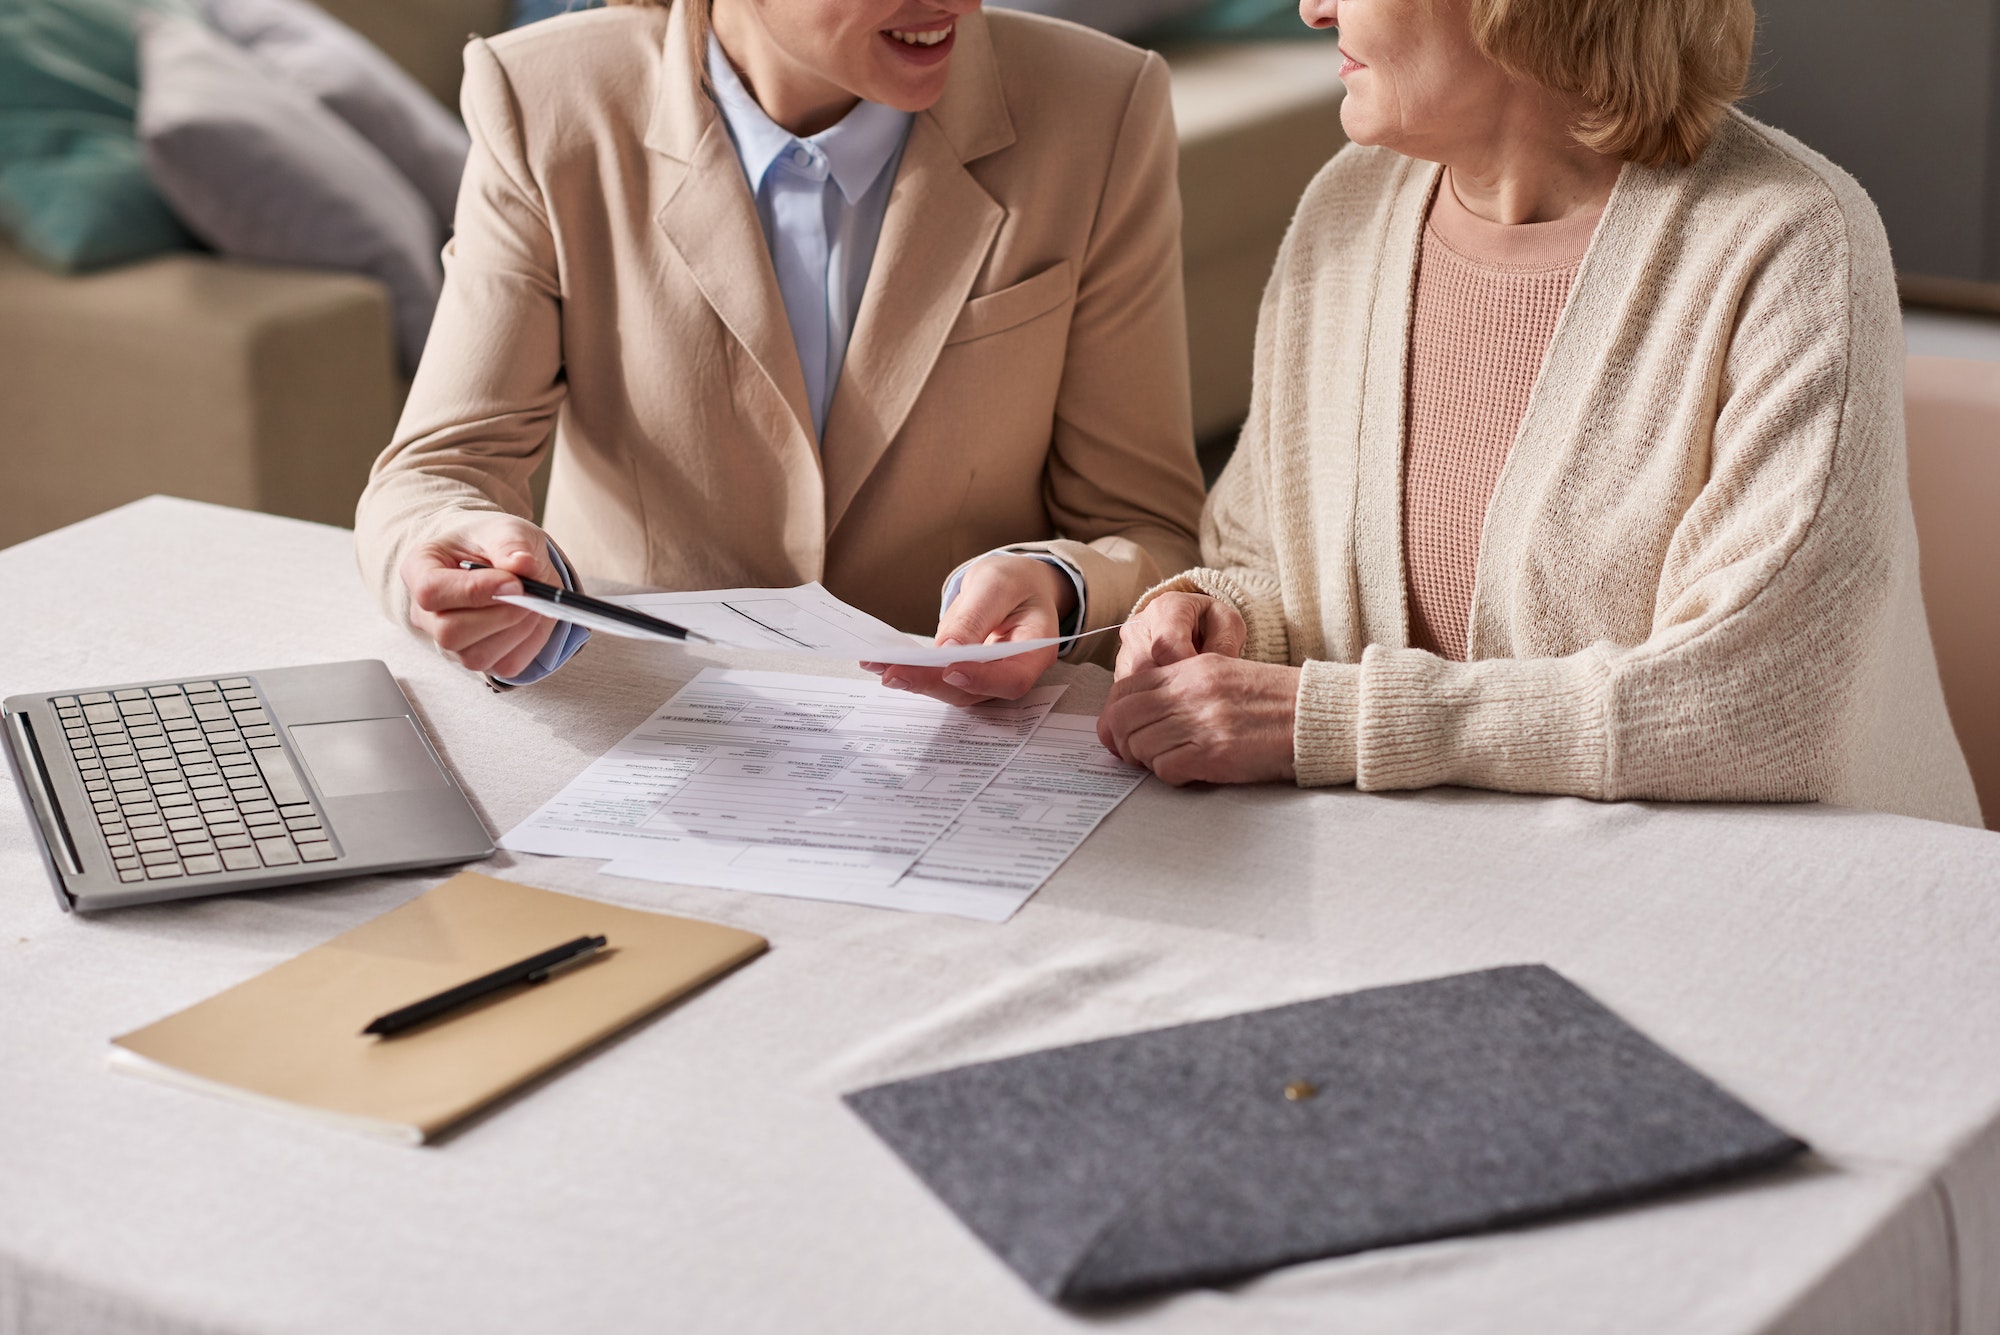 Businesswoman consulting senior woman about documents